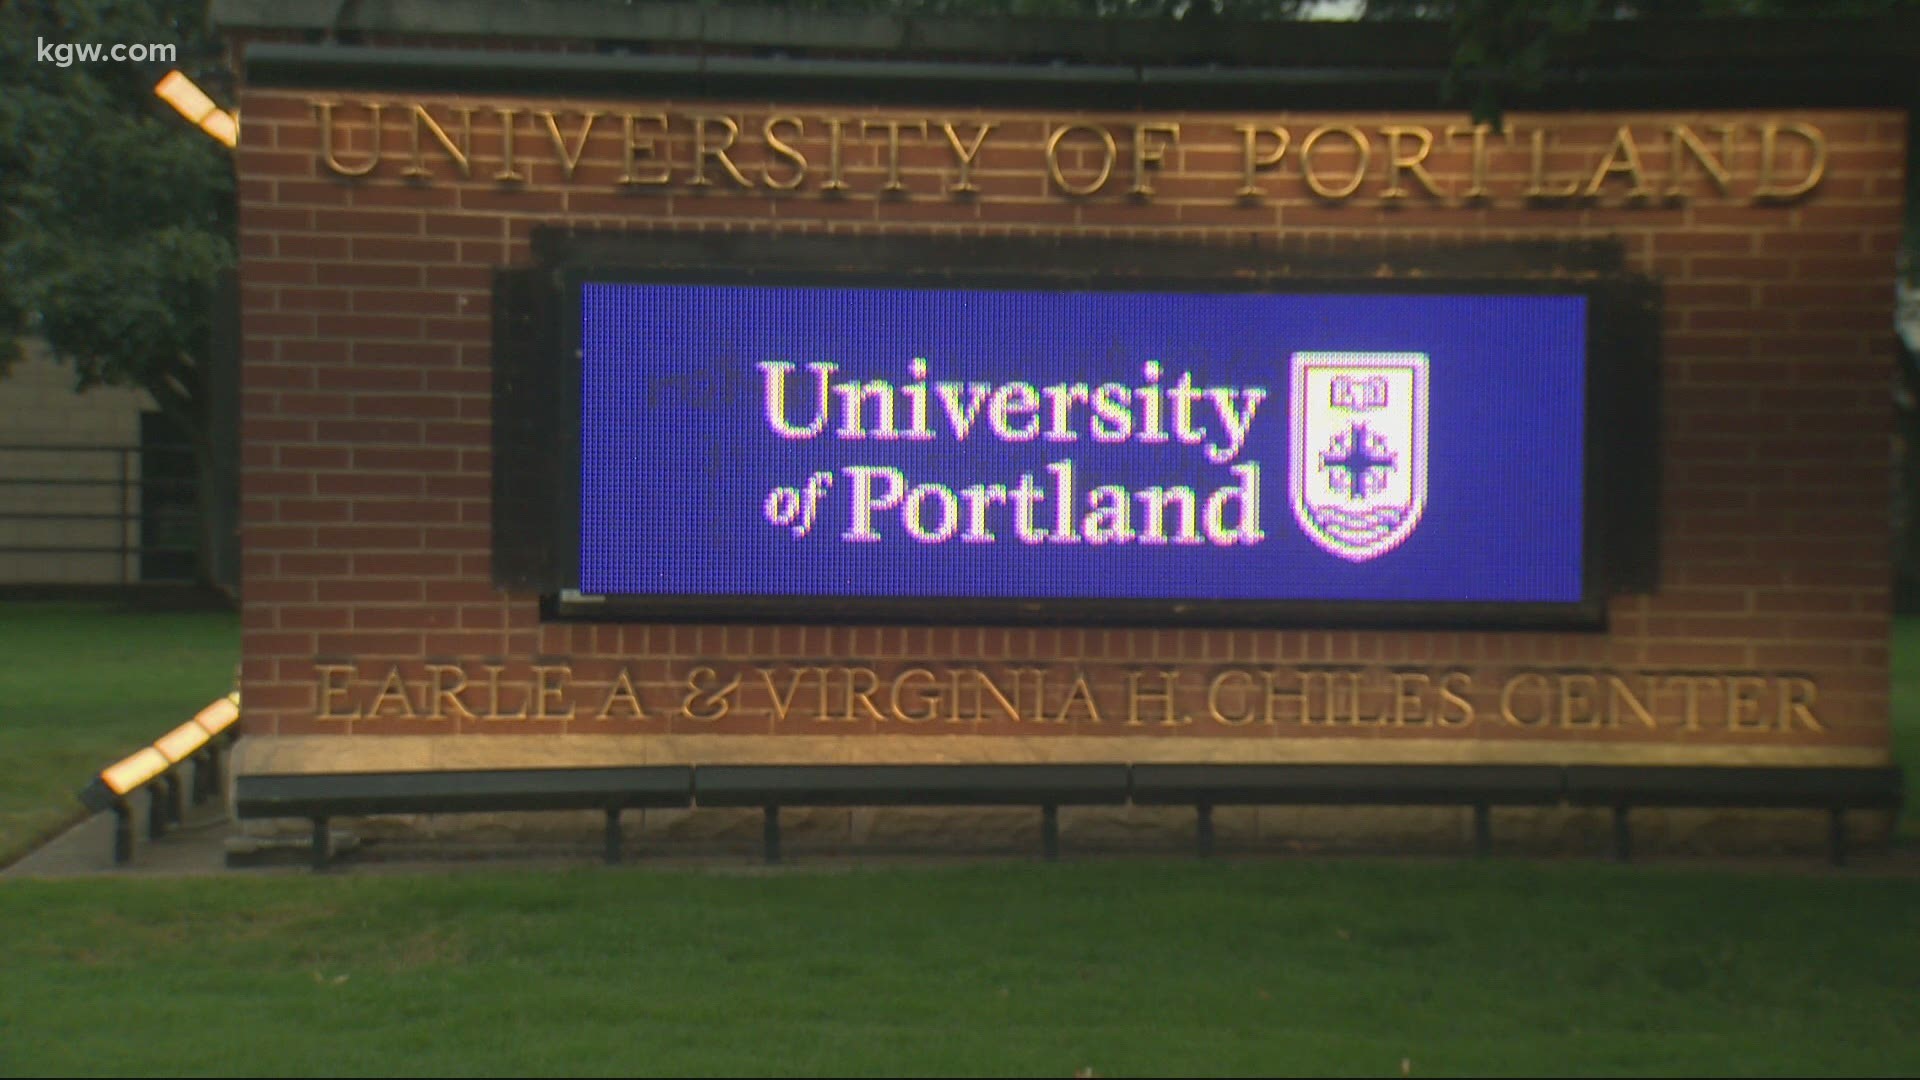 The new variant infected a University of Portland staff member who didn’t have any travel history. Health officials say variant is likely spreading in the community.